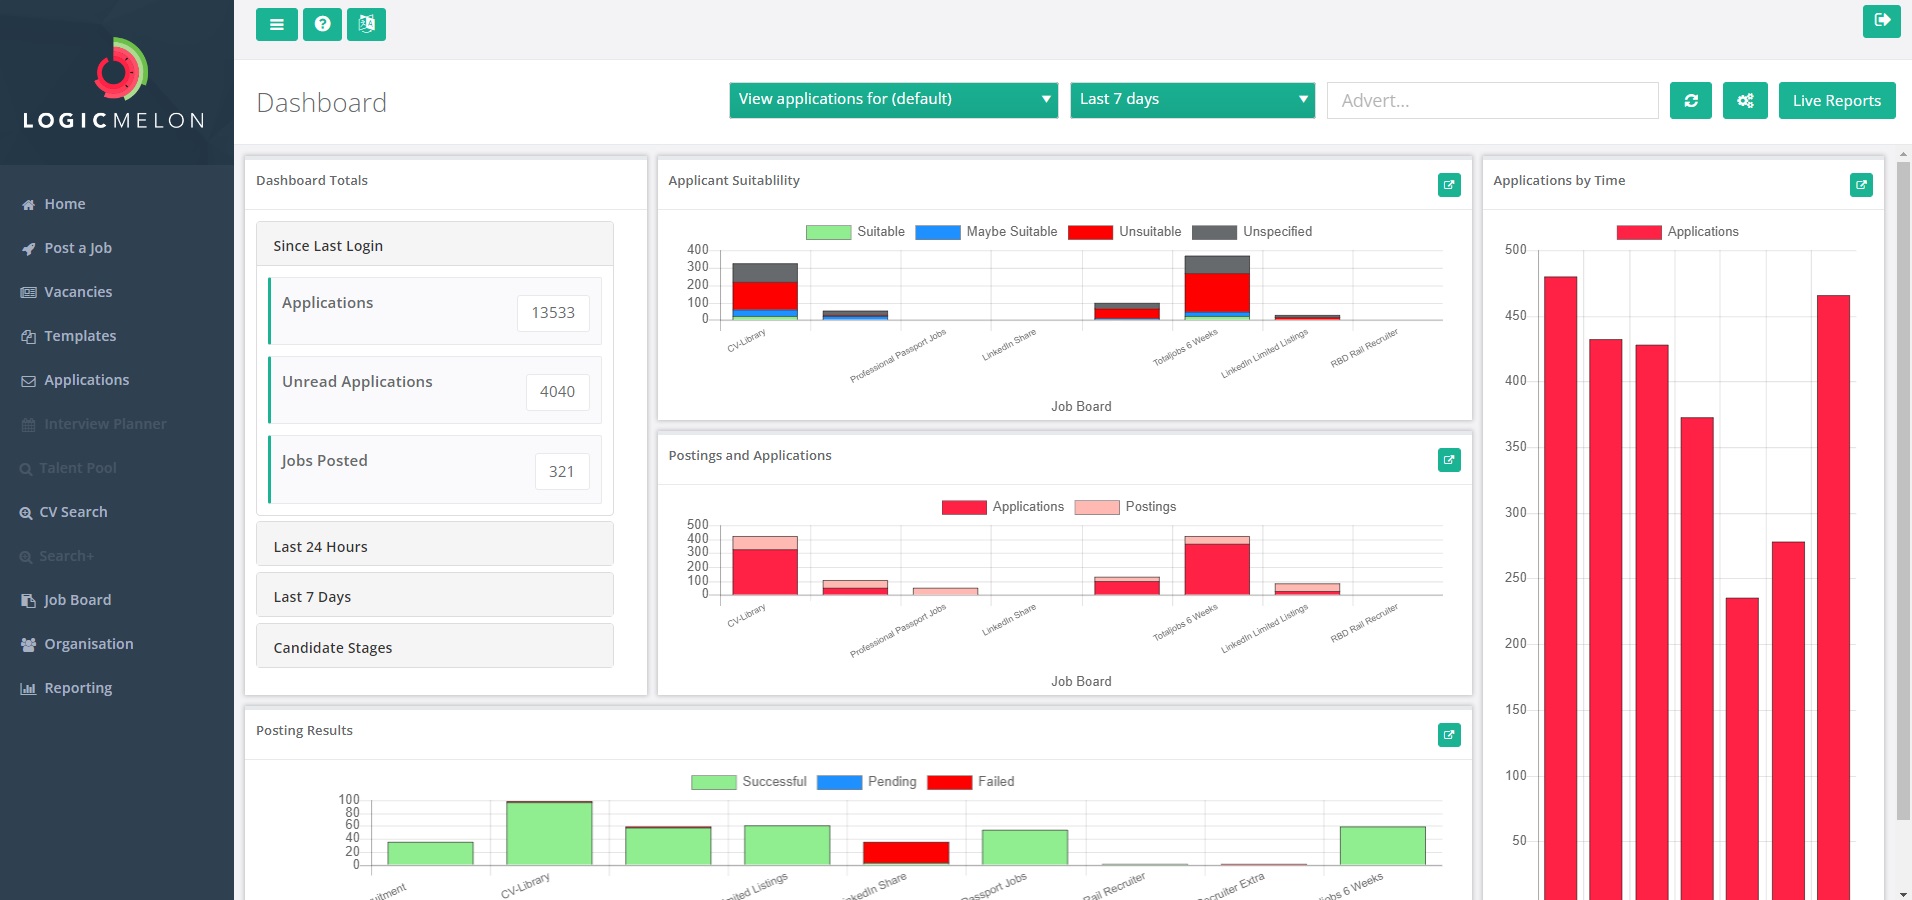 Custom the reports and analytics visible to you and your teams